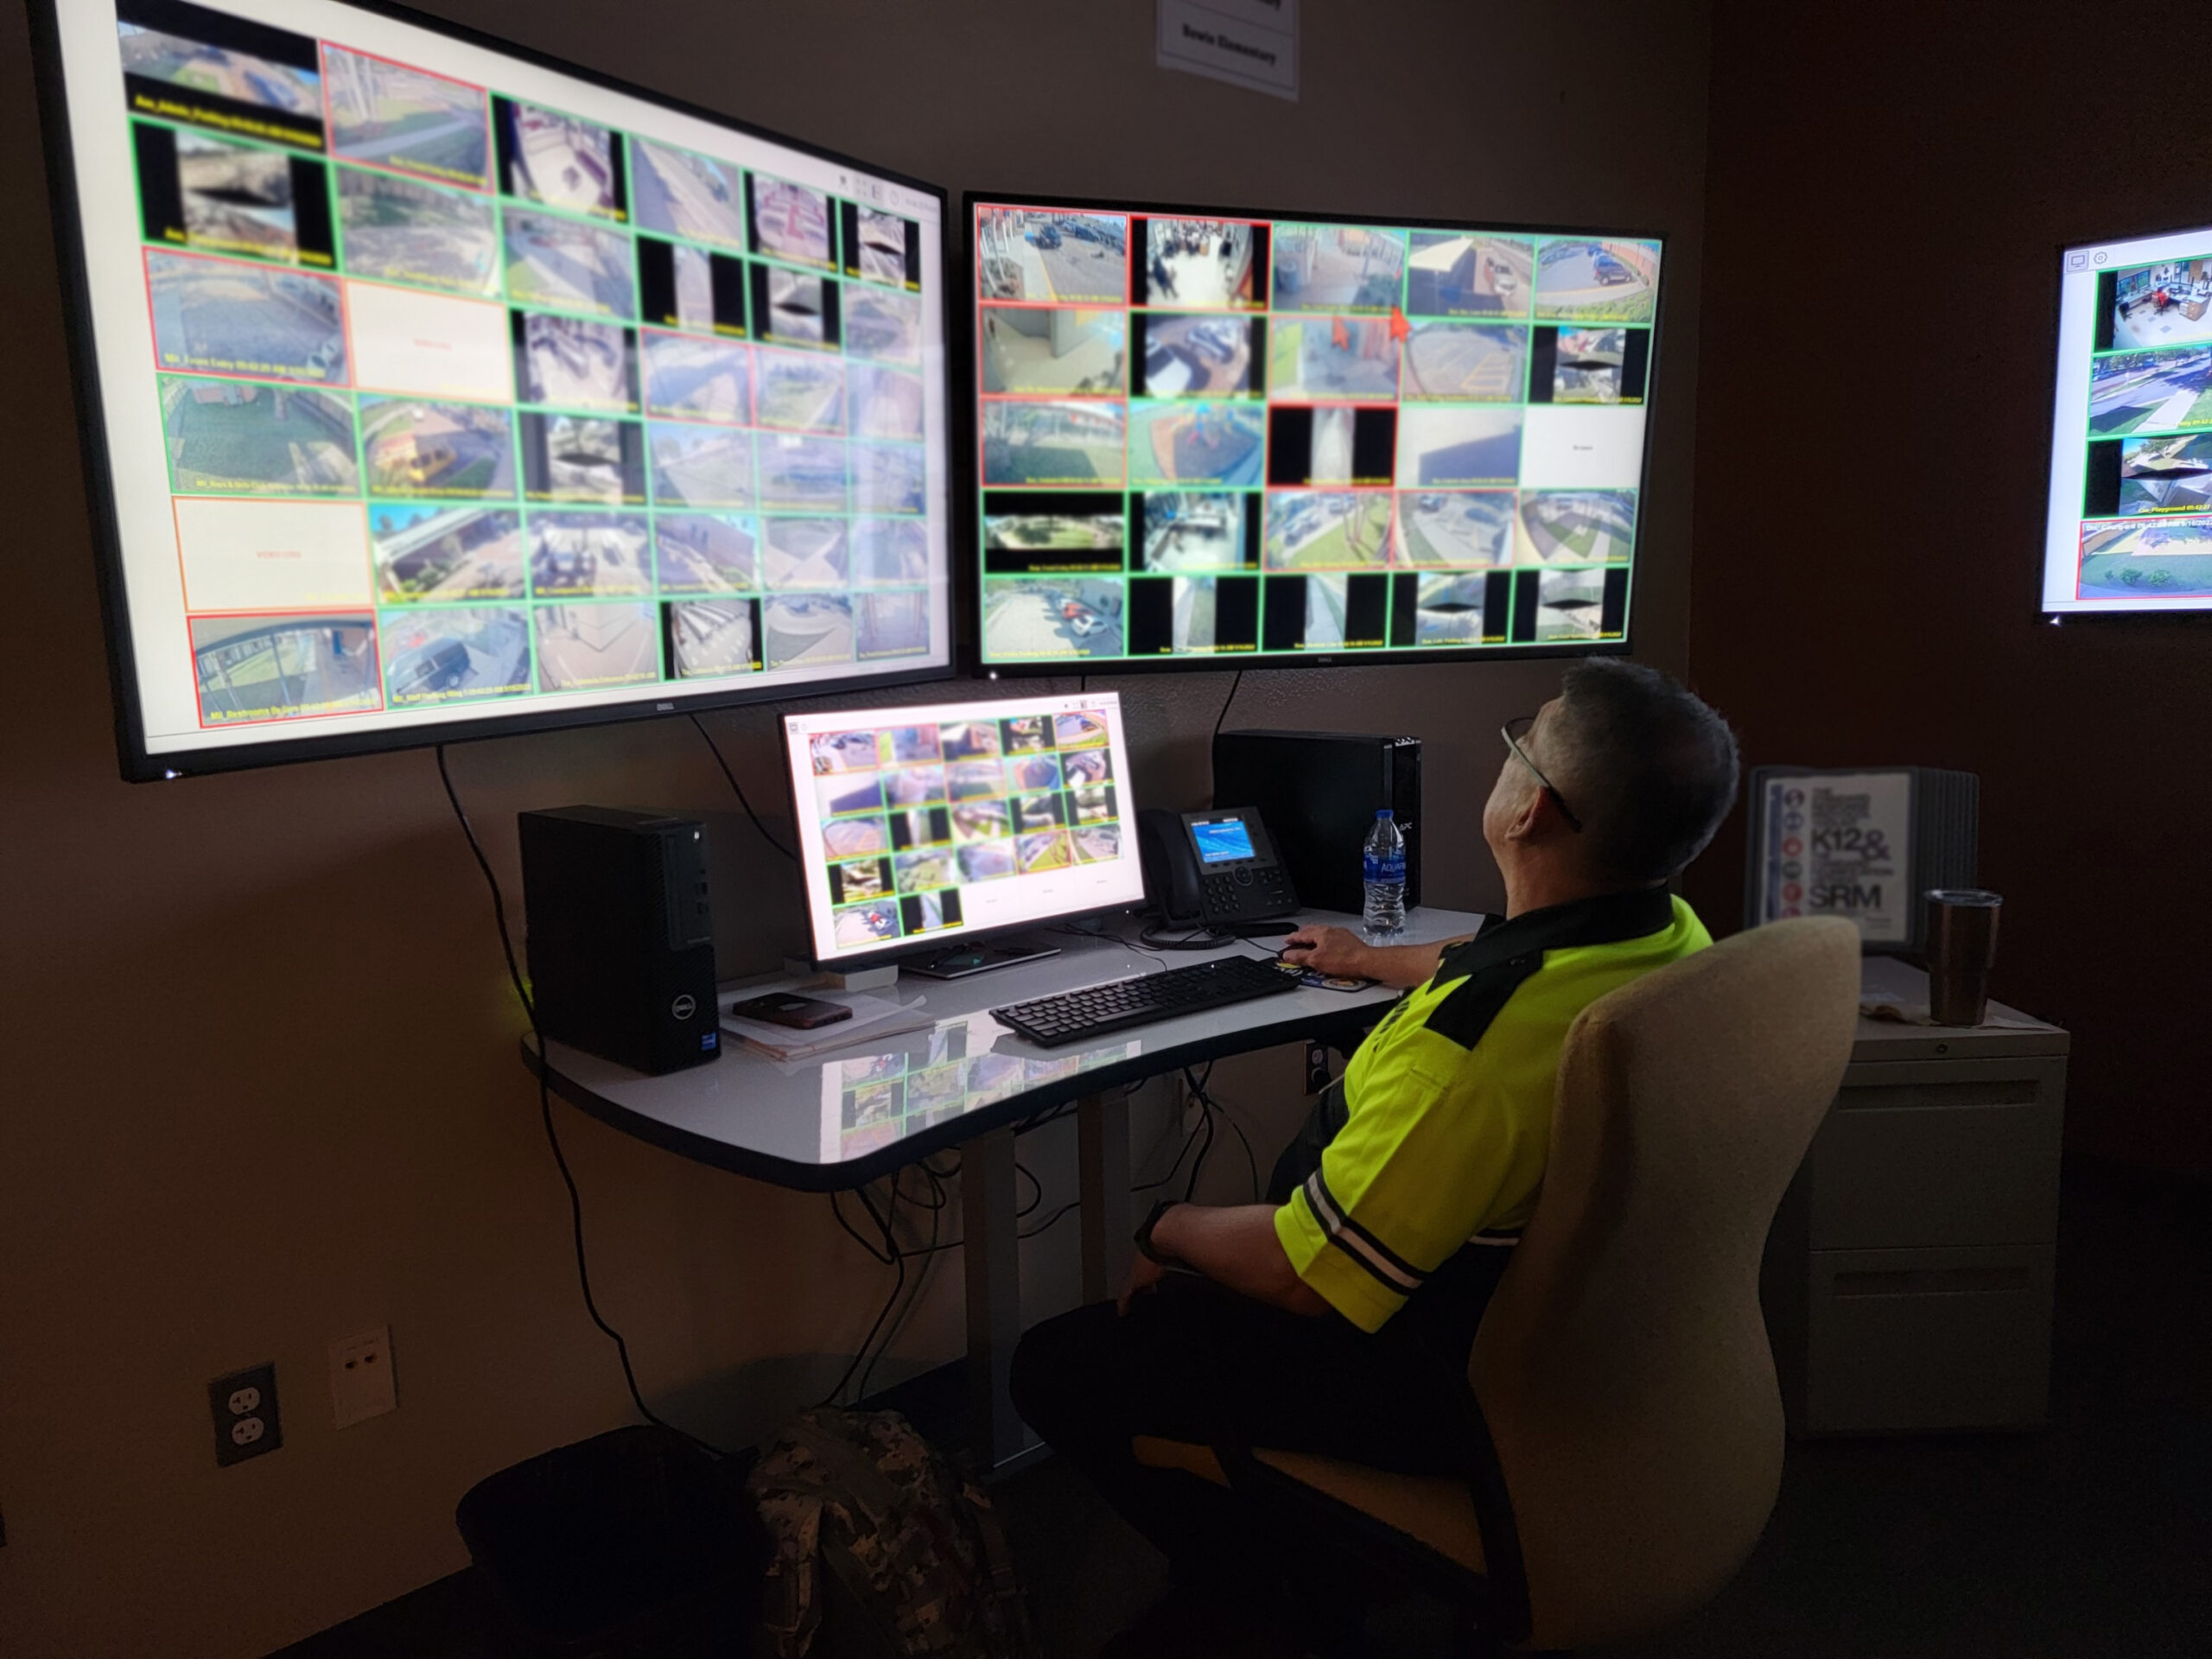 Security camera monitoring center provides 360-view of HCISD